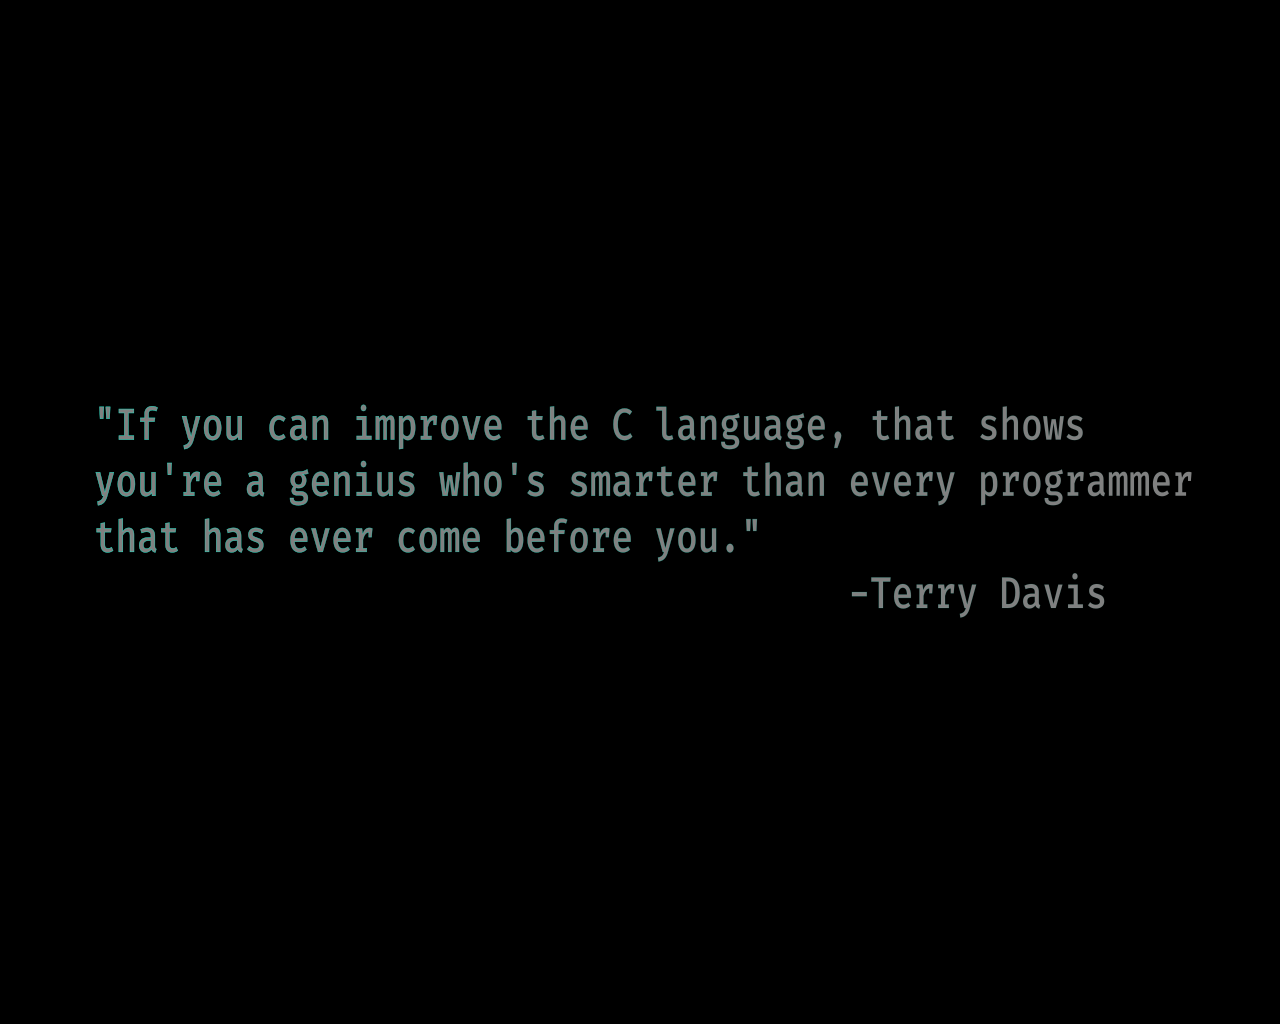 A Famous quote from Terry Davis